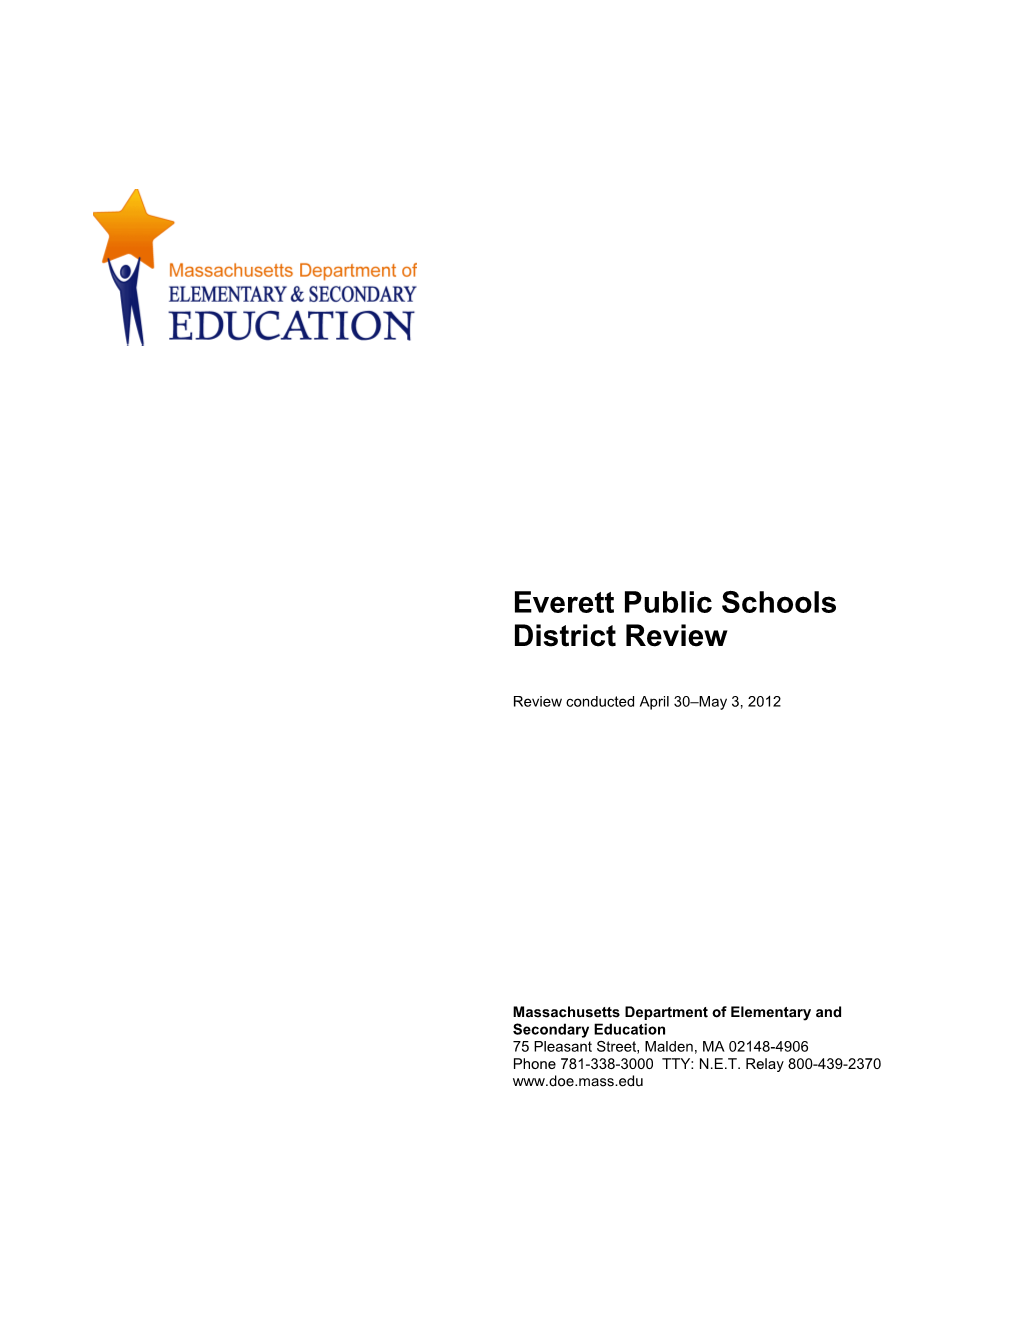 Everett District Review Report, 2012 Onsite